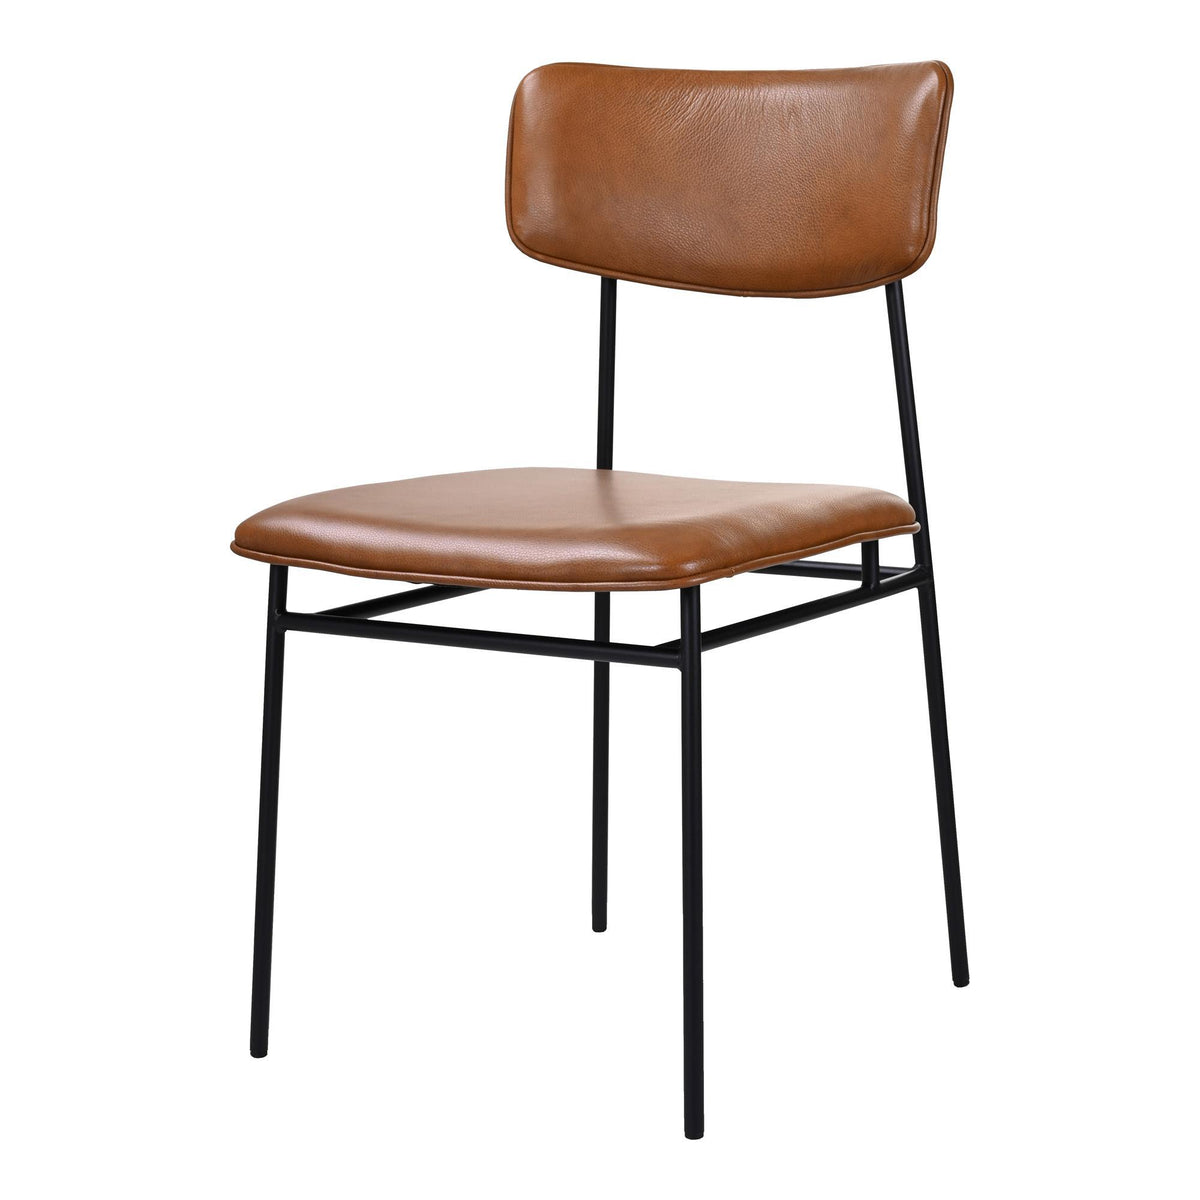 Moe's Home Collection Sailor Dining Chair Brown - EQ-1016-03